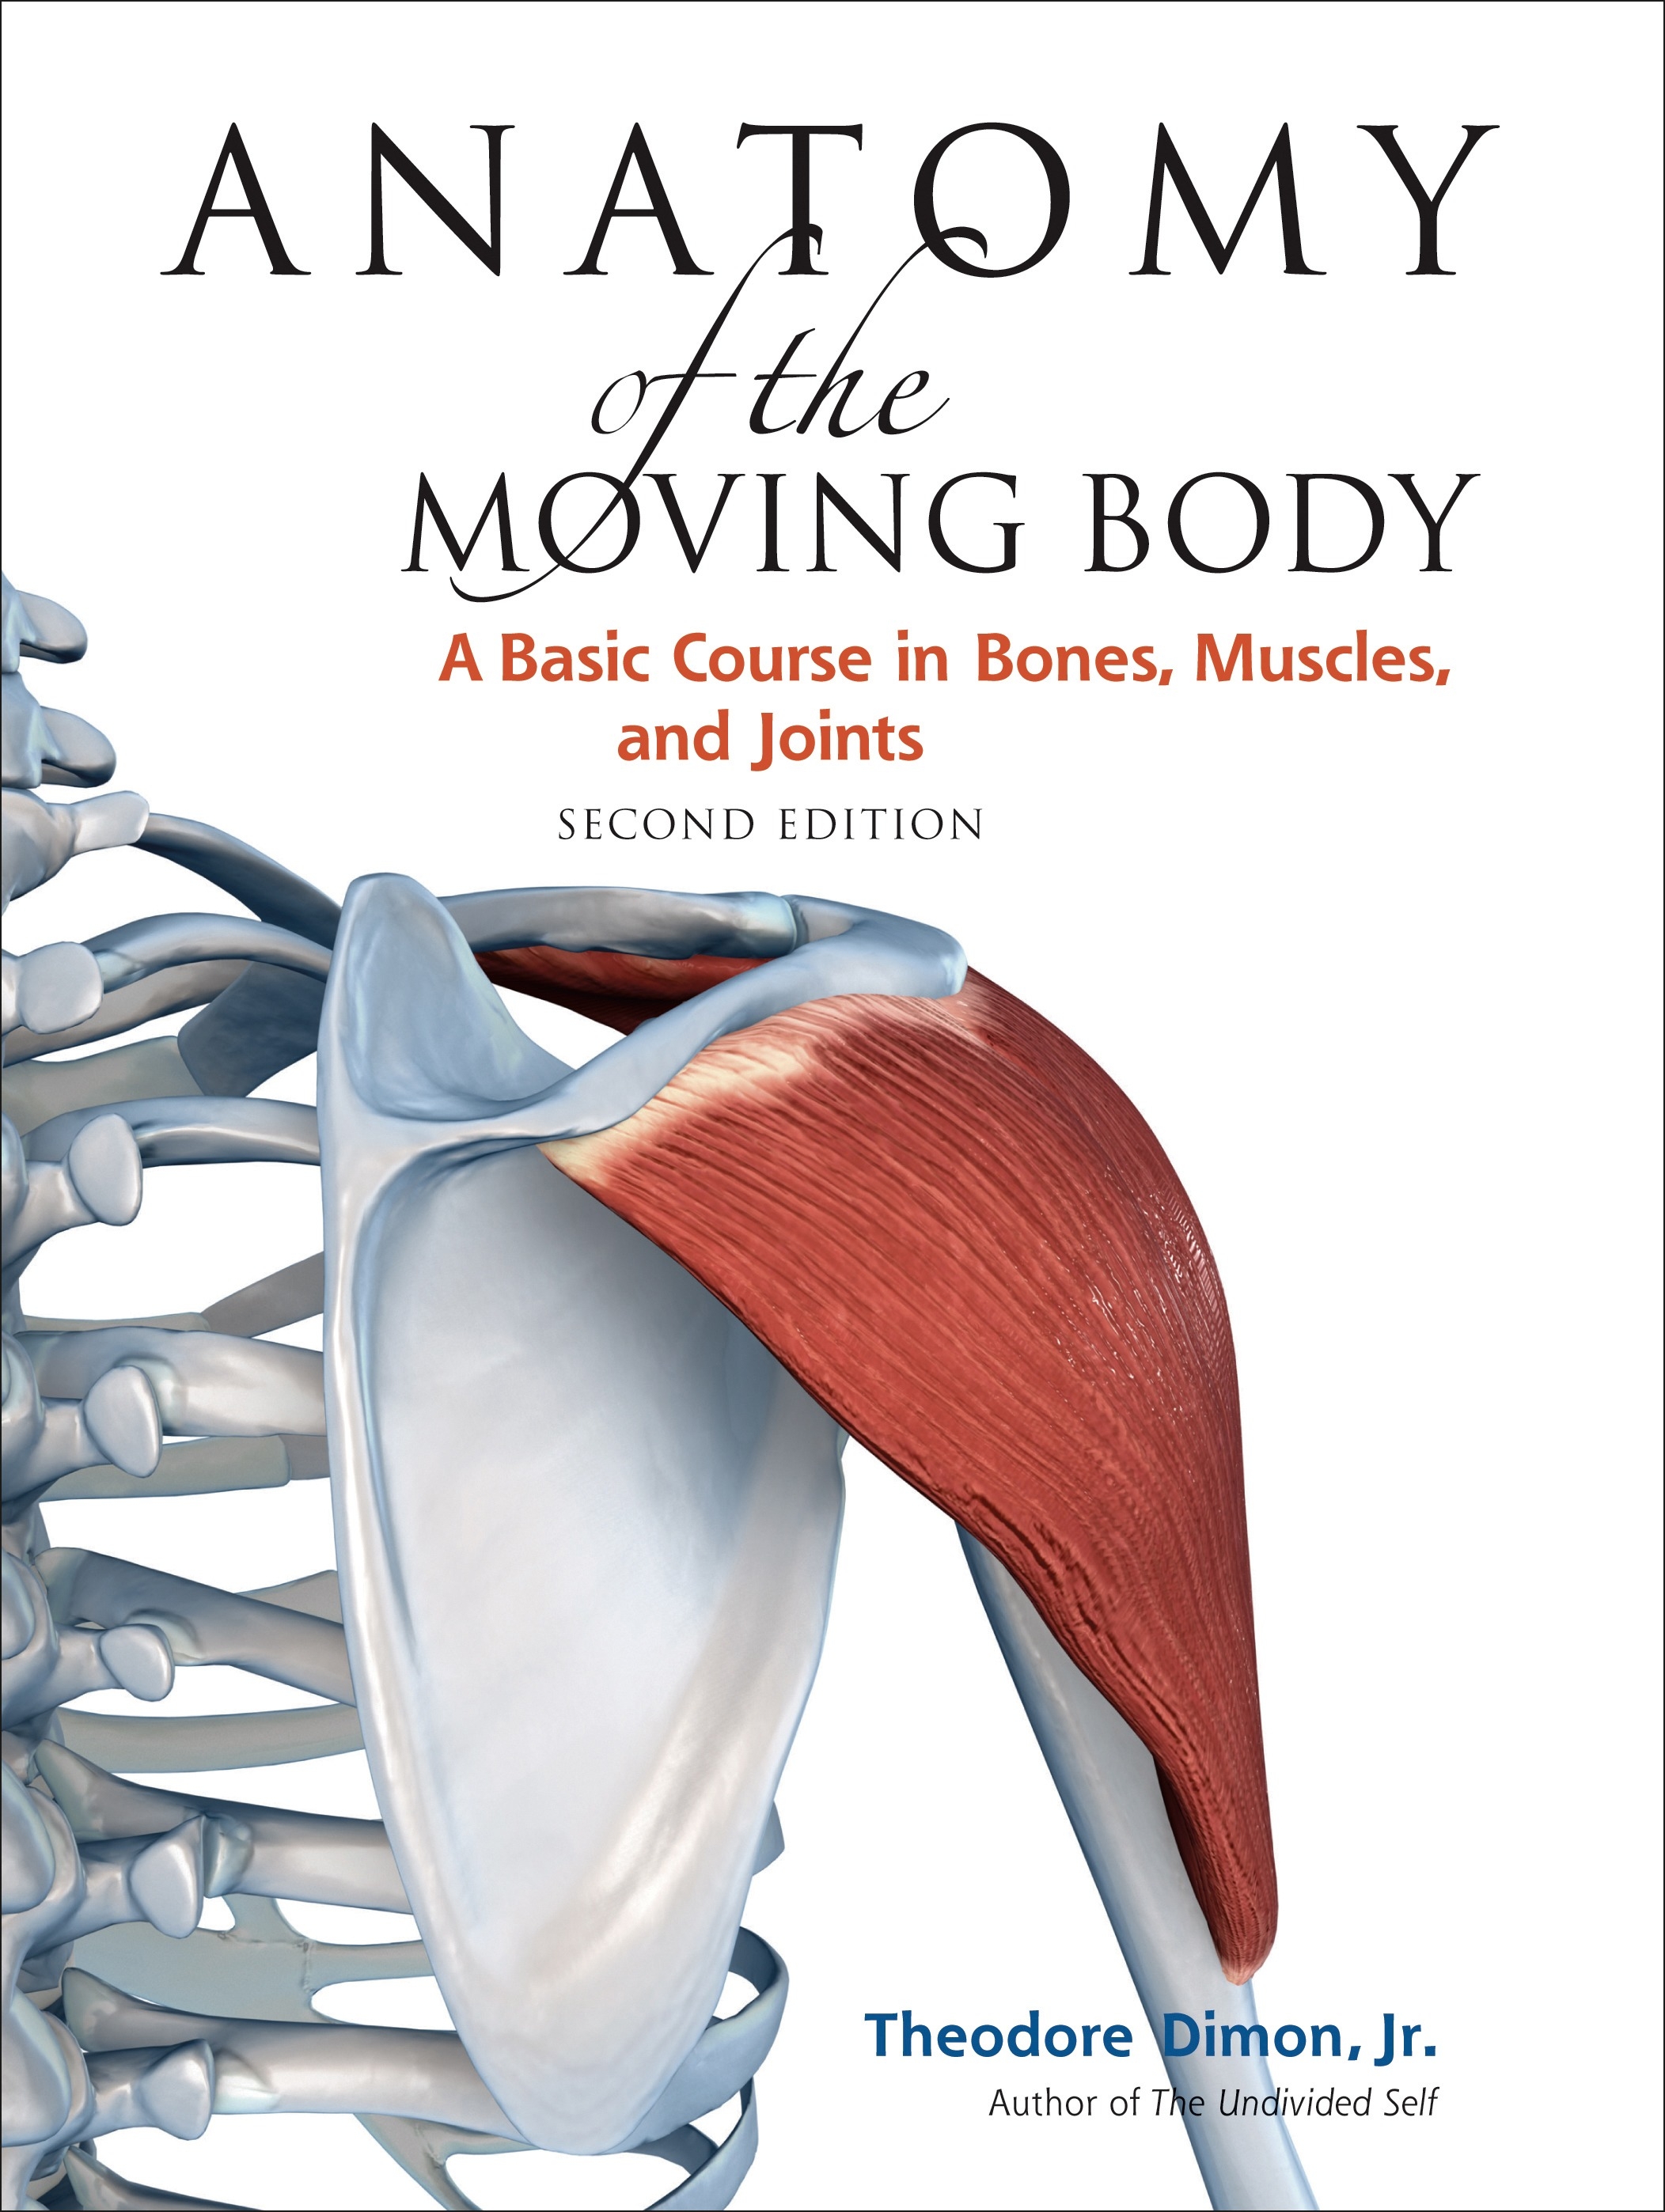 Anatomy Of The Moving Body by Theodore Dimon - Penguin ...